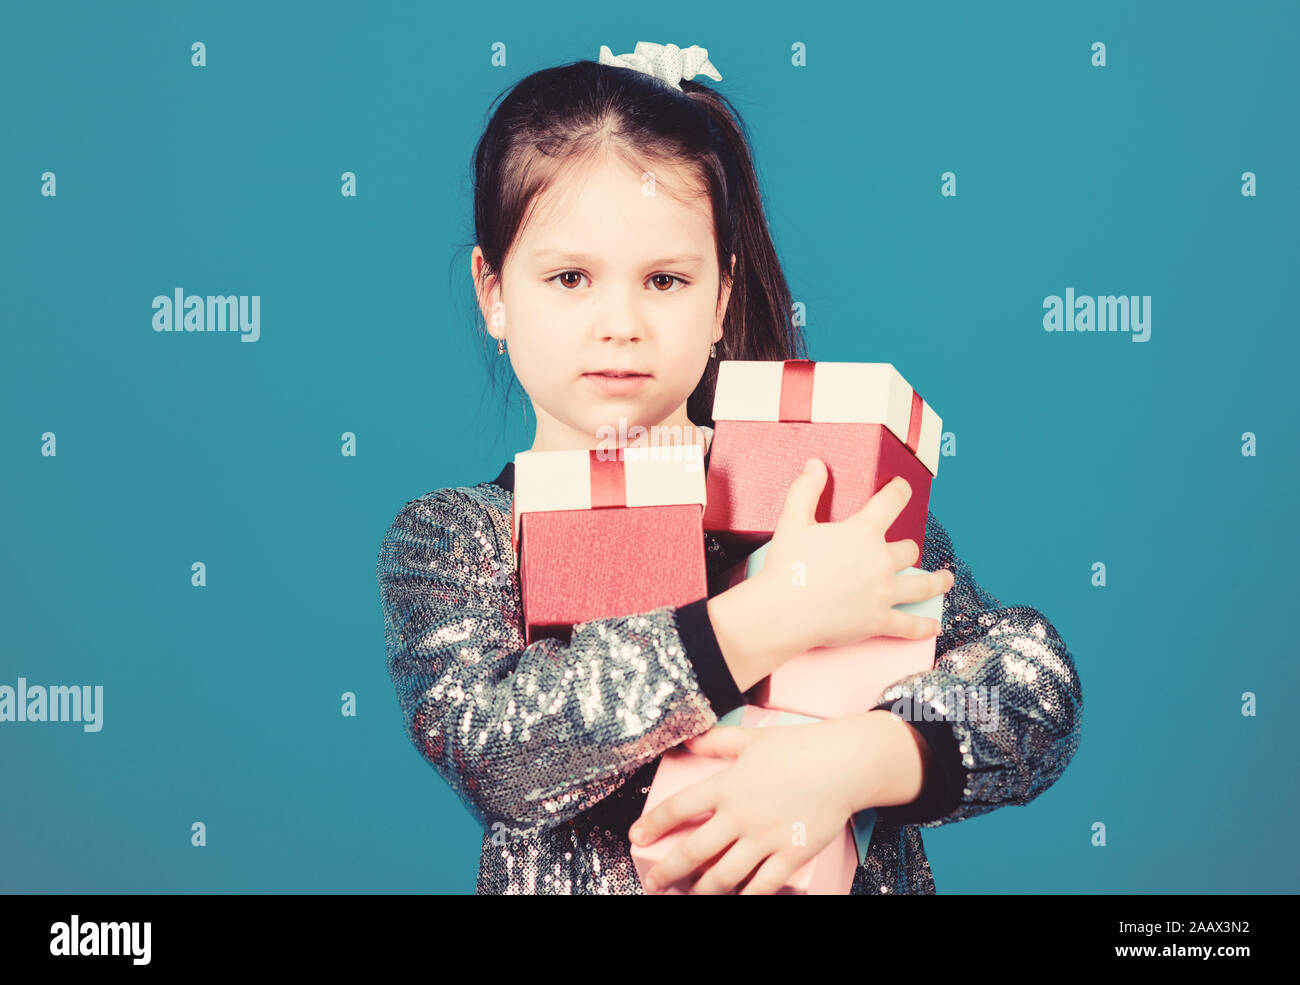 Special happens every day. Girl with gift boxes blue background. Black friday. Shopping day. Child carry lot gift boxes. Surprise gift box. Birthday wish list. World of happiness. Only for me. Stock Photo